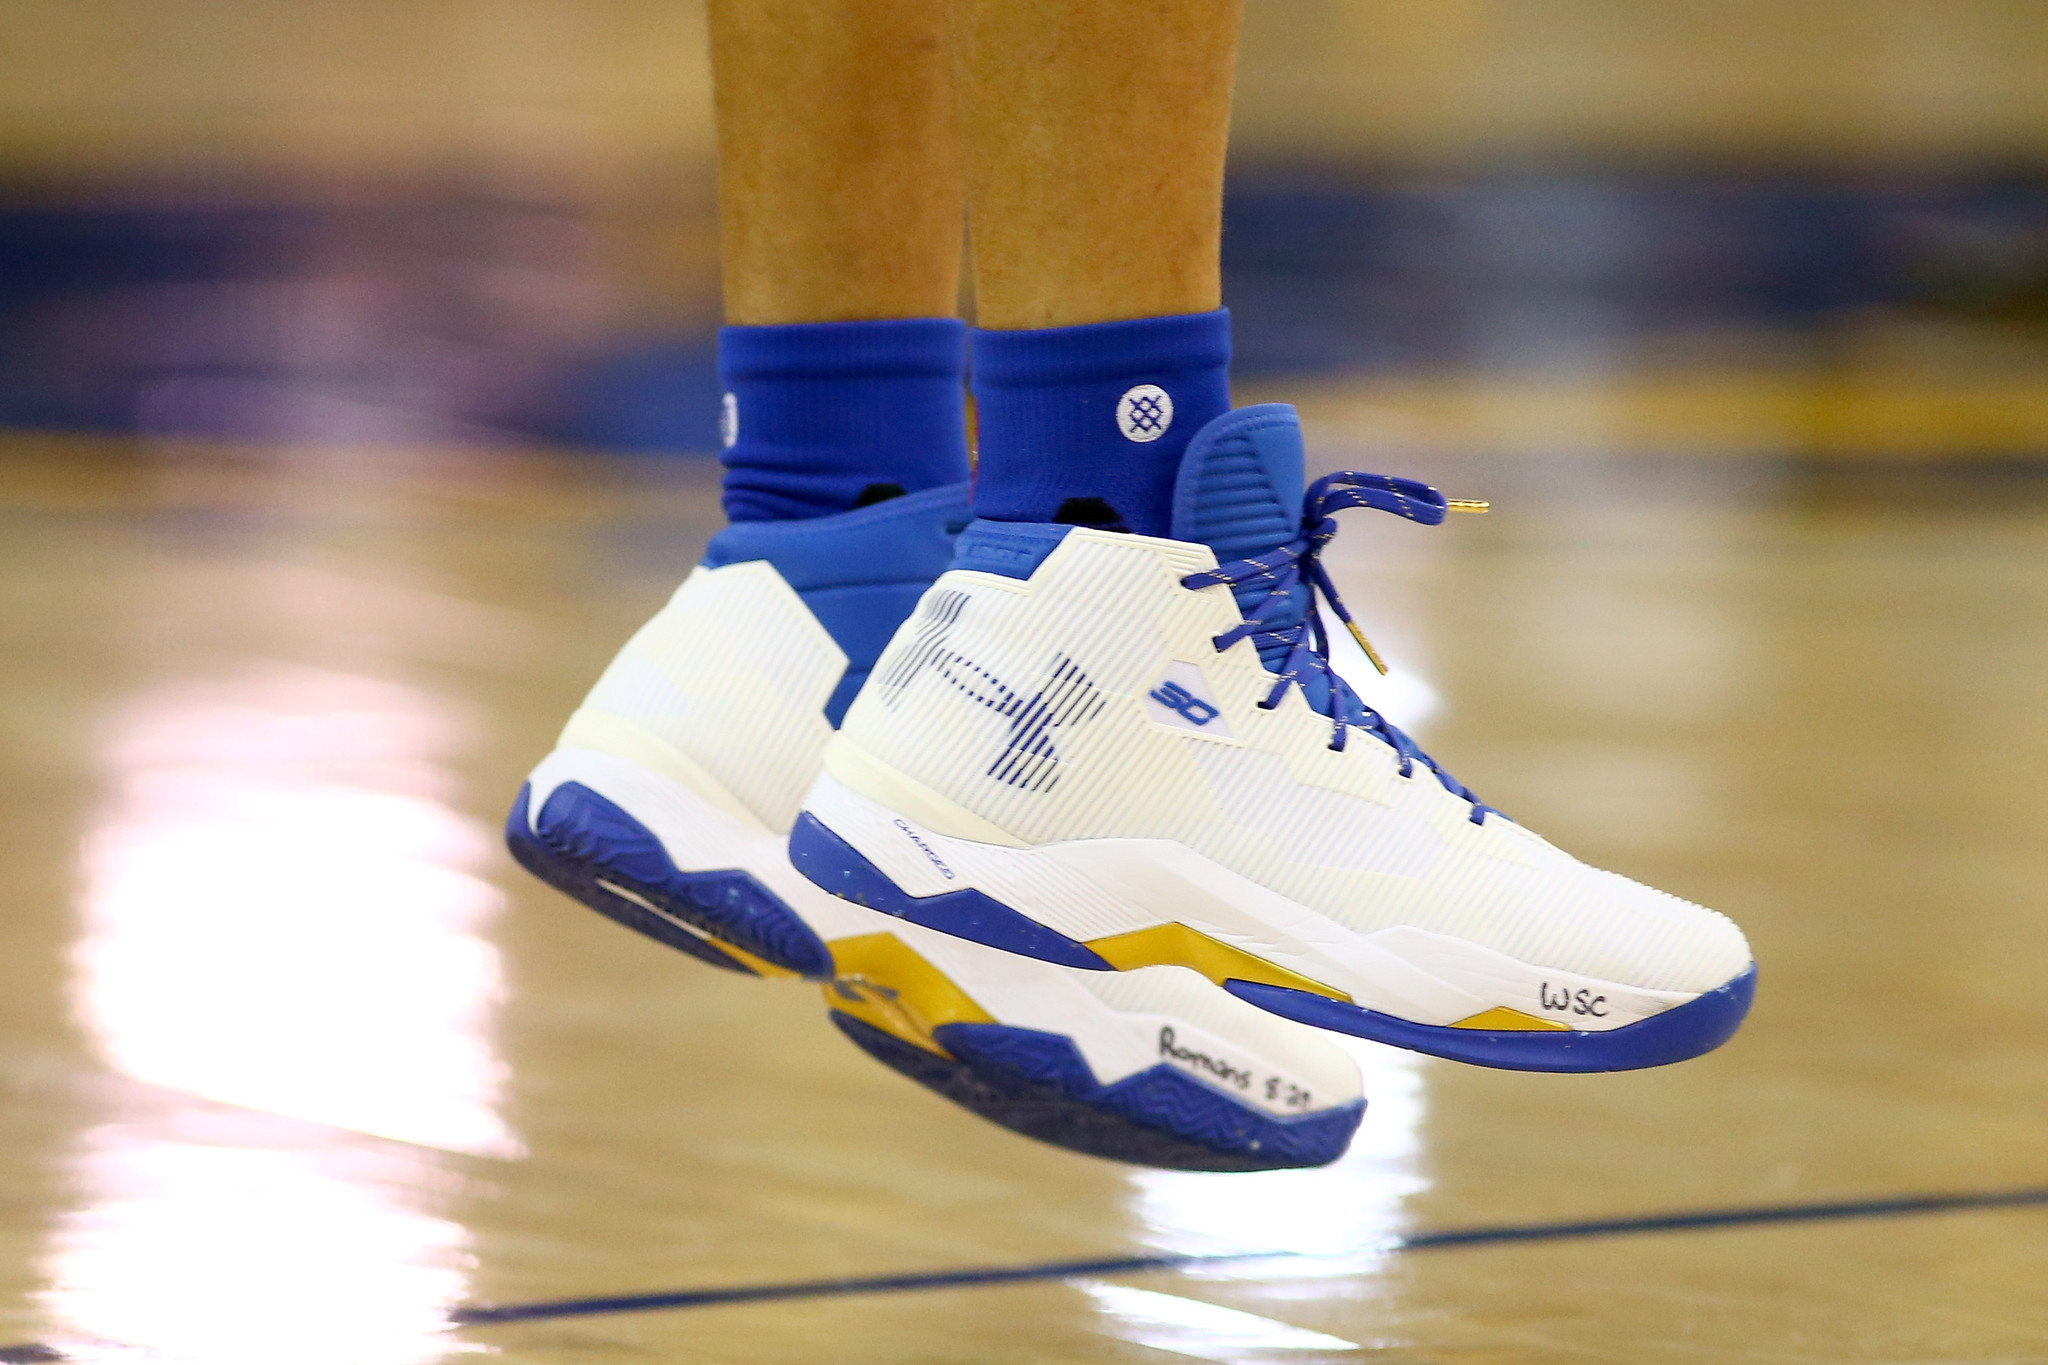 Creator of Under Armour's Curry basketball shoe has chosen Under Armour ...